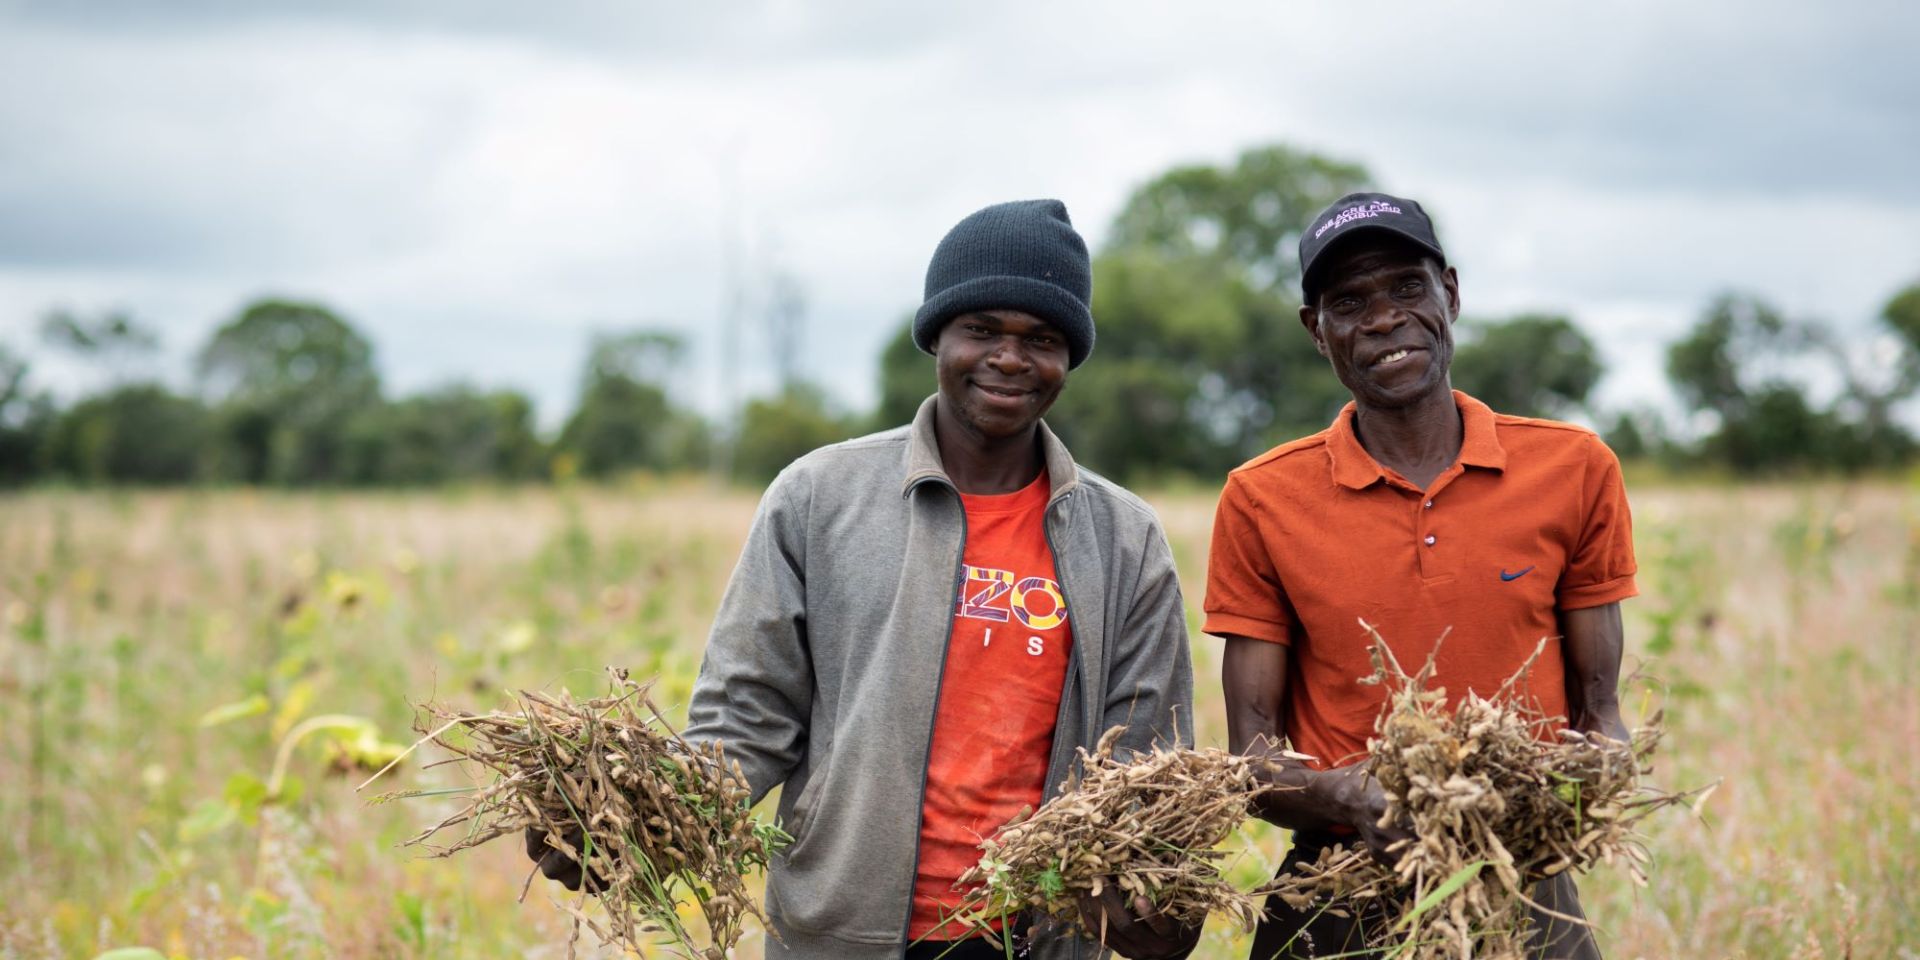 Smallholder farmer with his son standing in his field collecting groundnuts